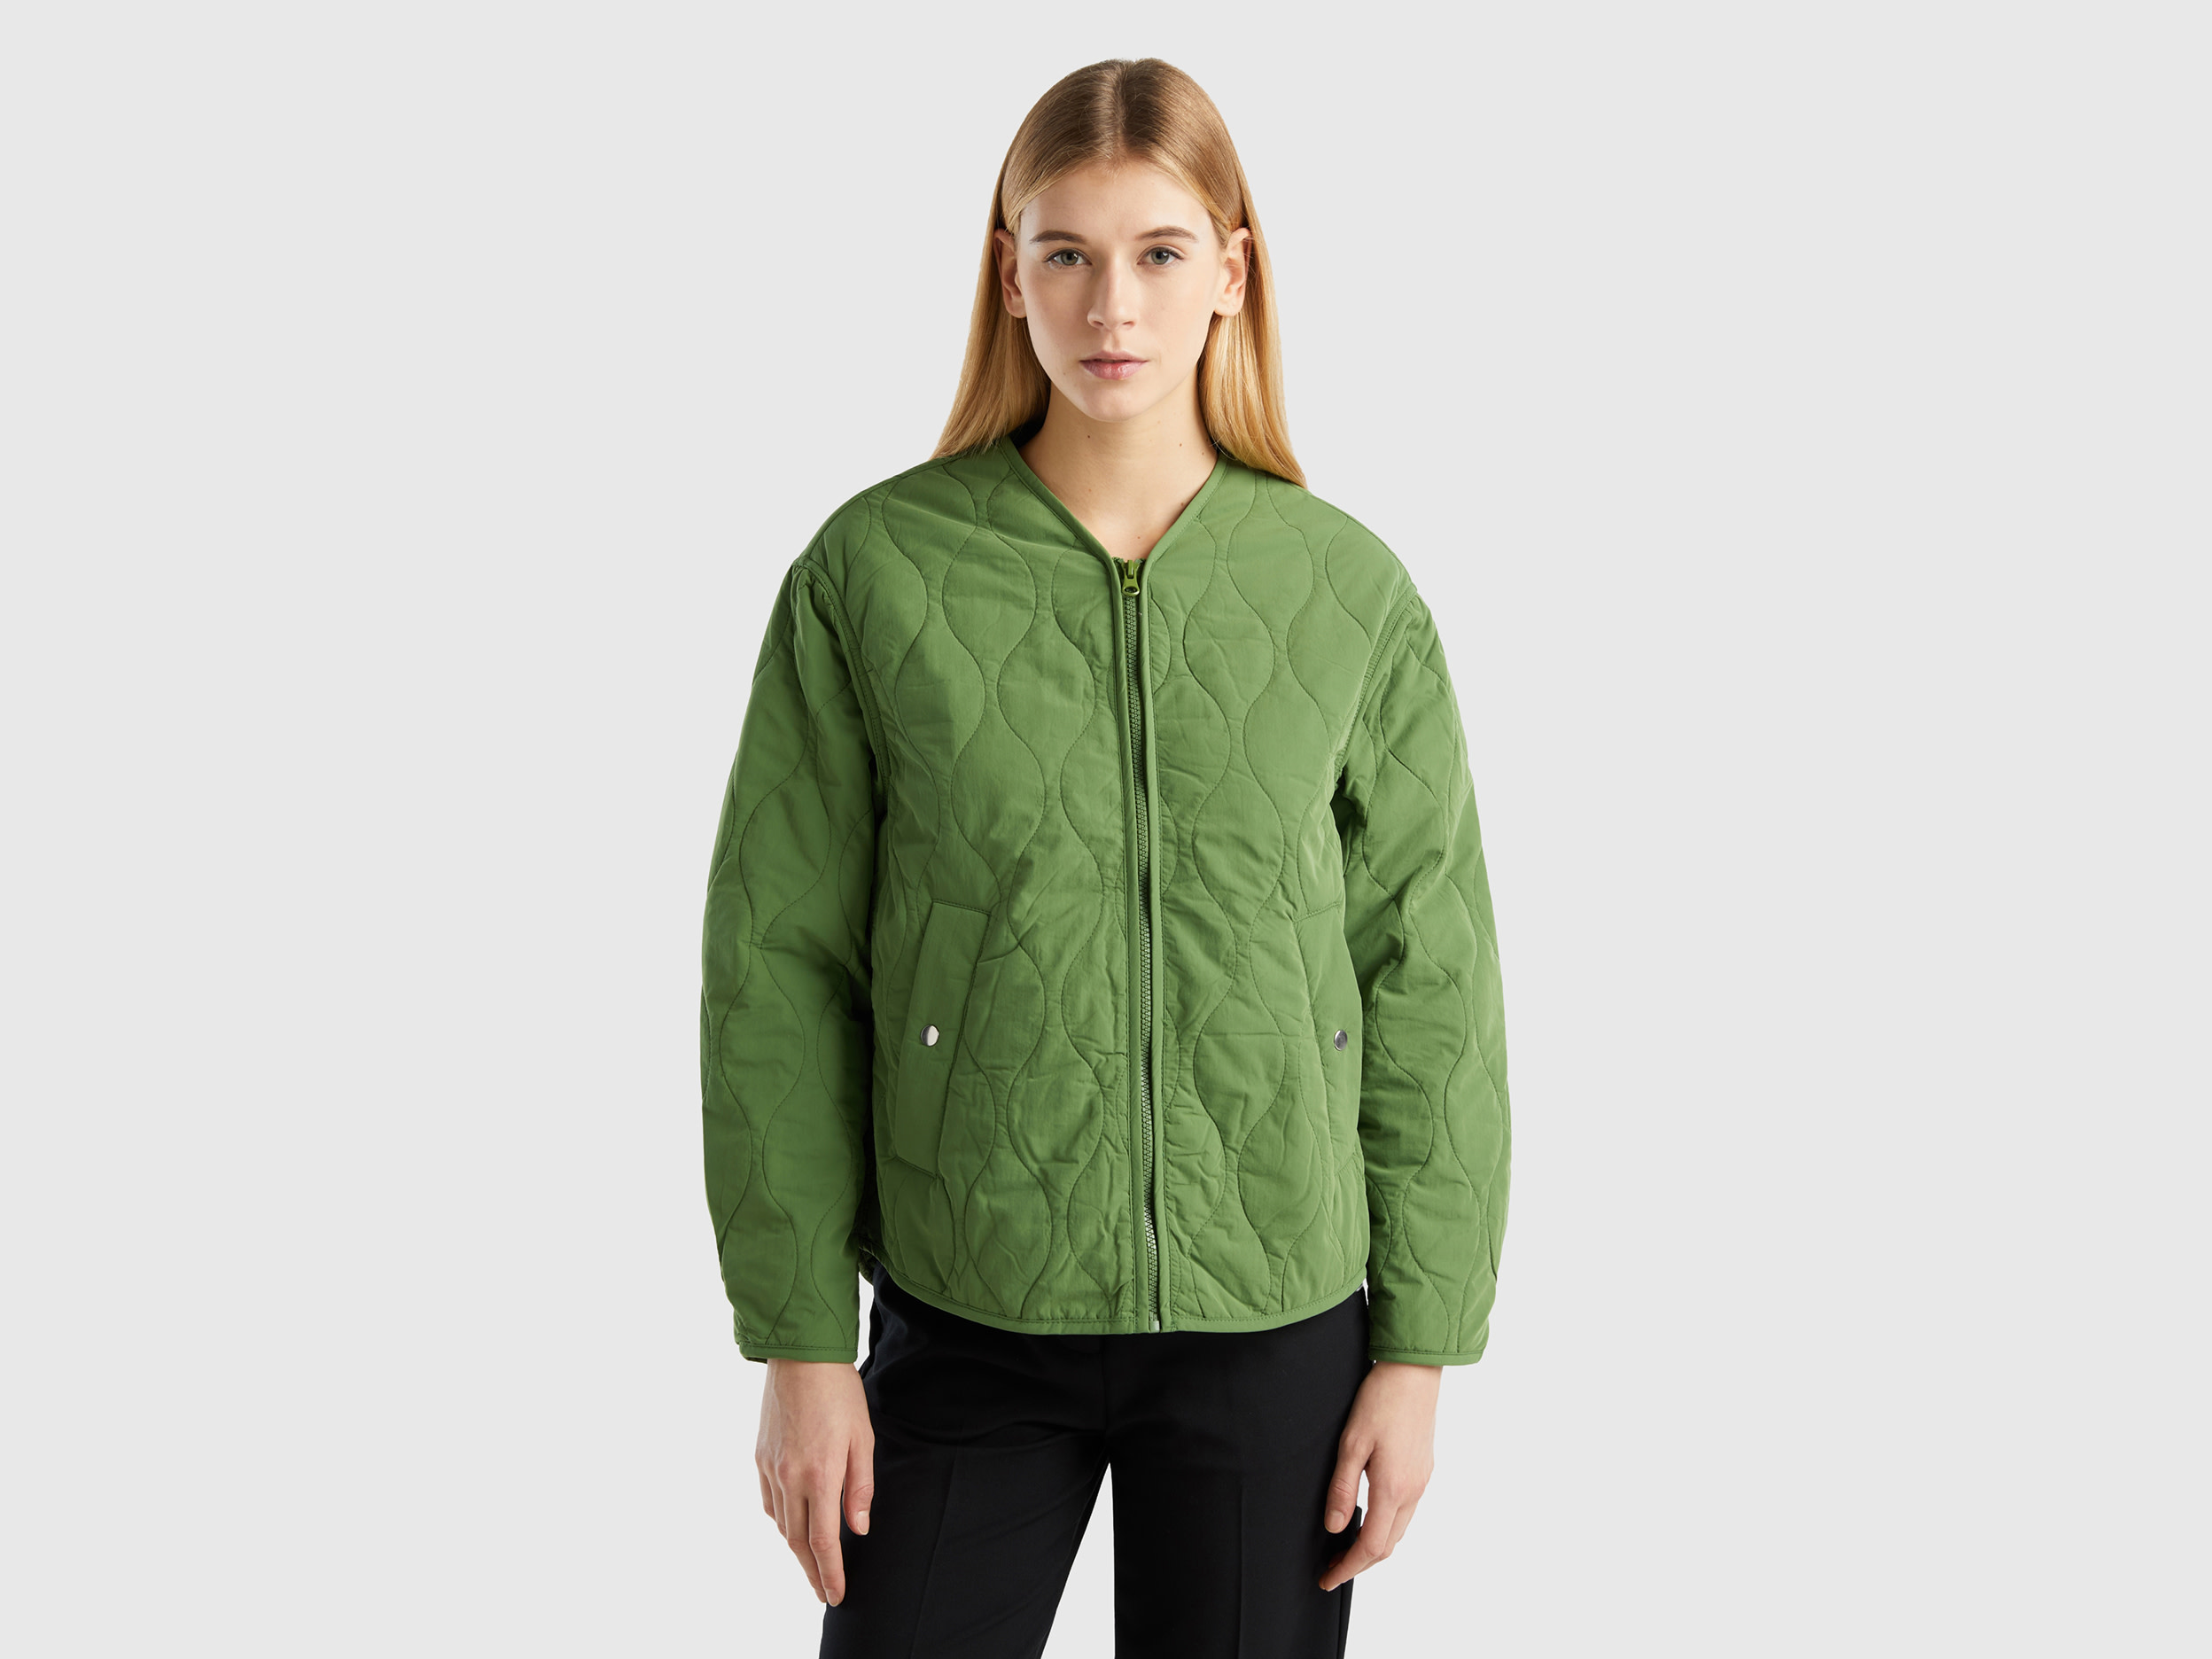 Image of Benetton, Recycled Nylon Padded Jacket, size S, Military Green, Women